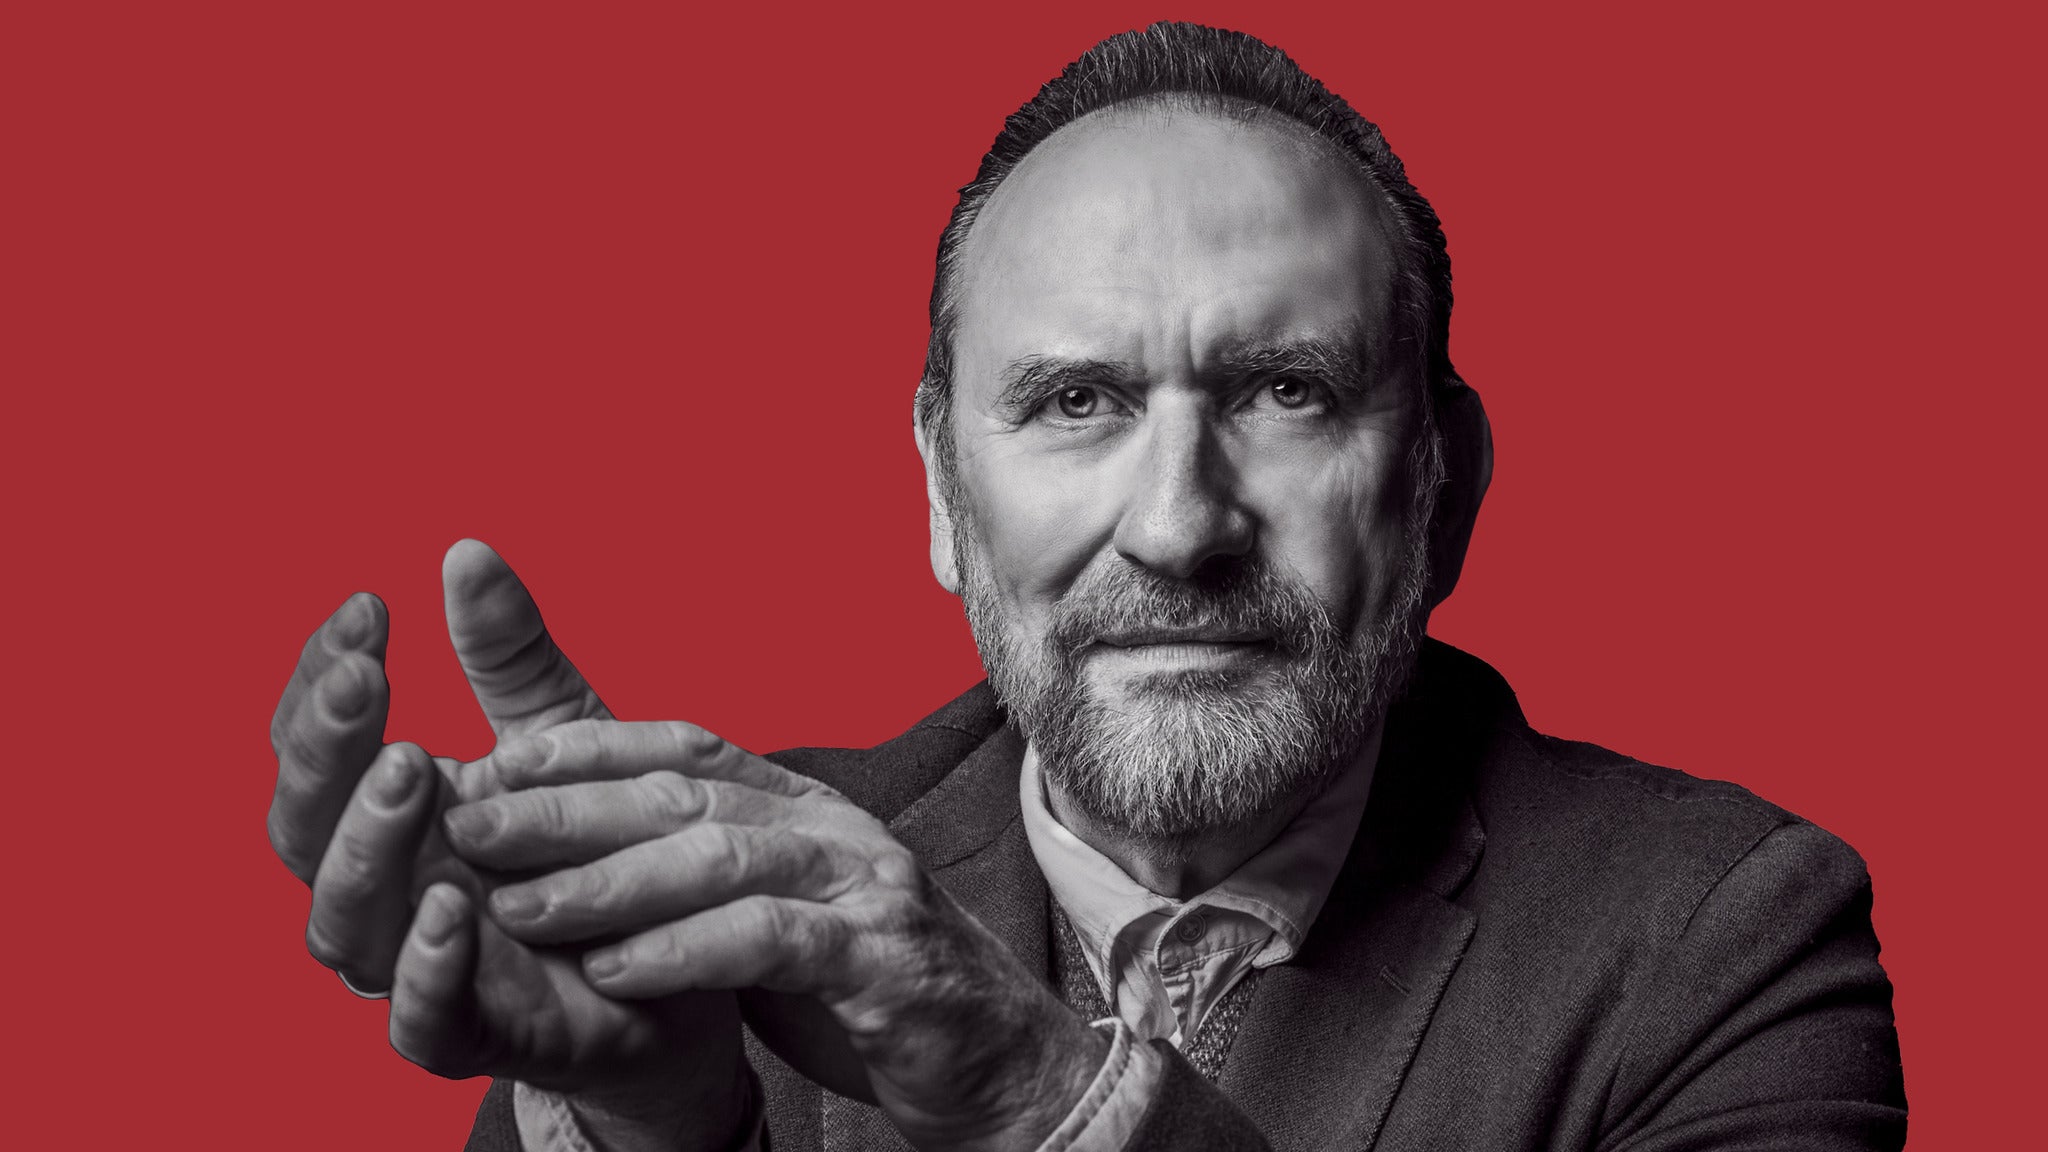 Colin Hay with Special Guest Lazlo Bane at The Coach House